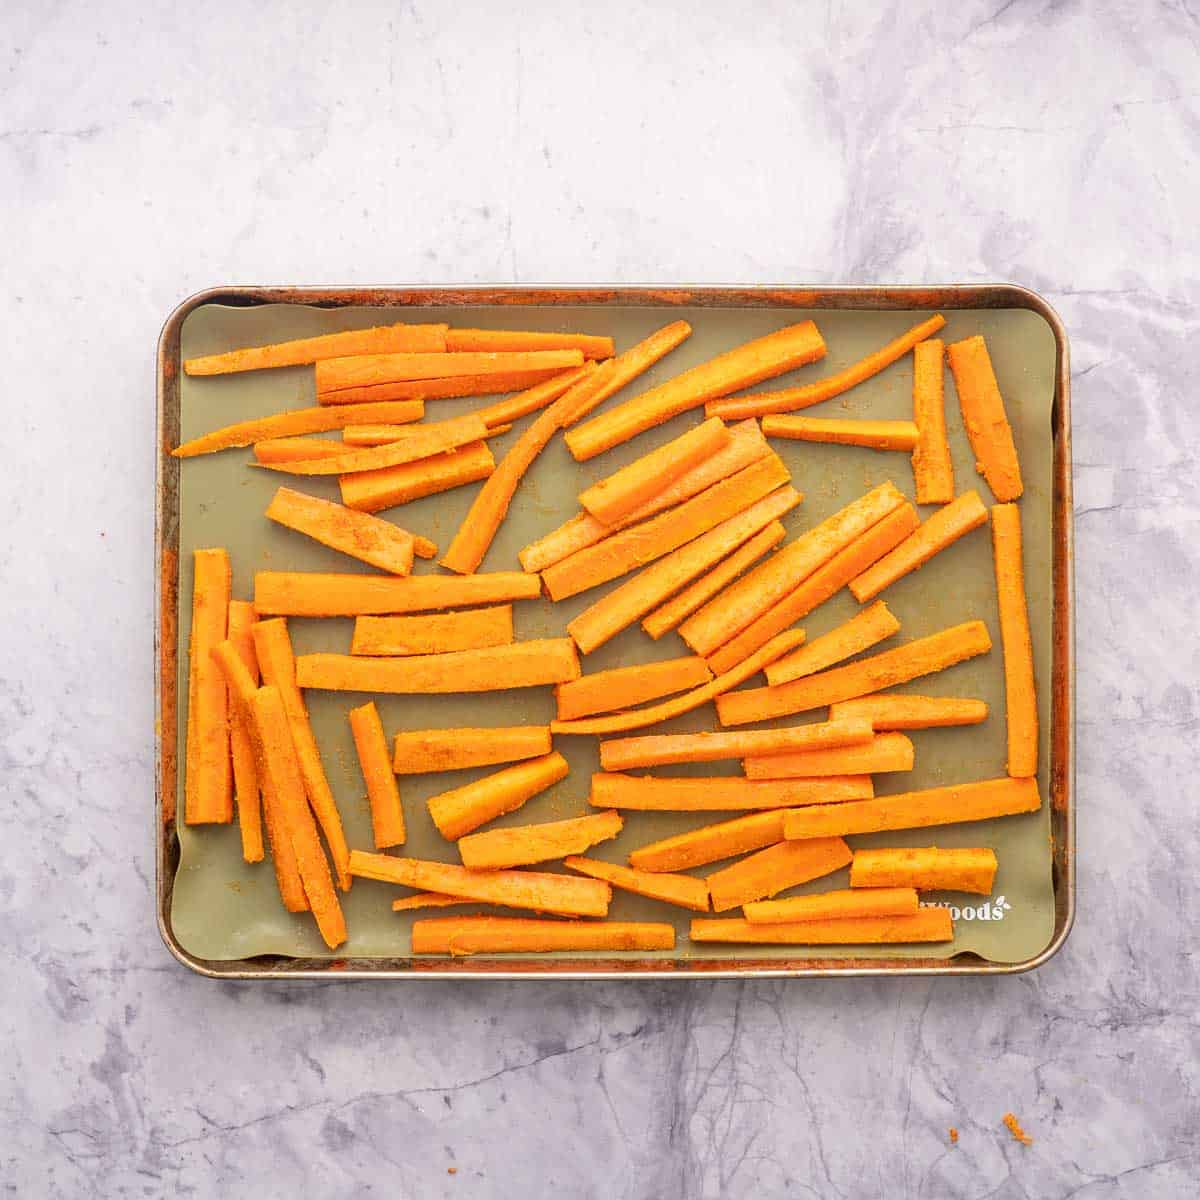 Carrot sticks on a lined baking sheet ready to go into the oven.